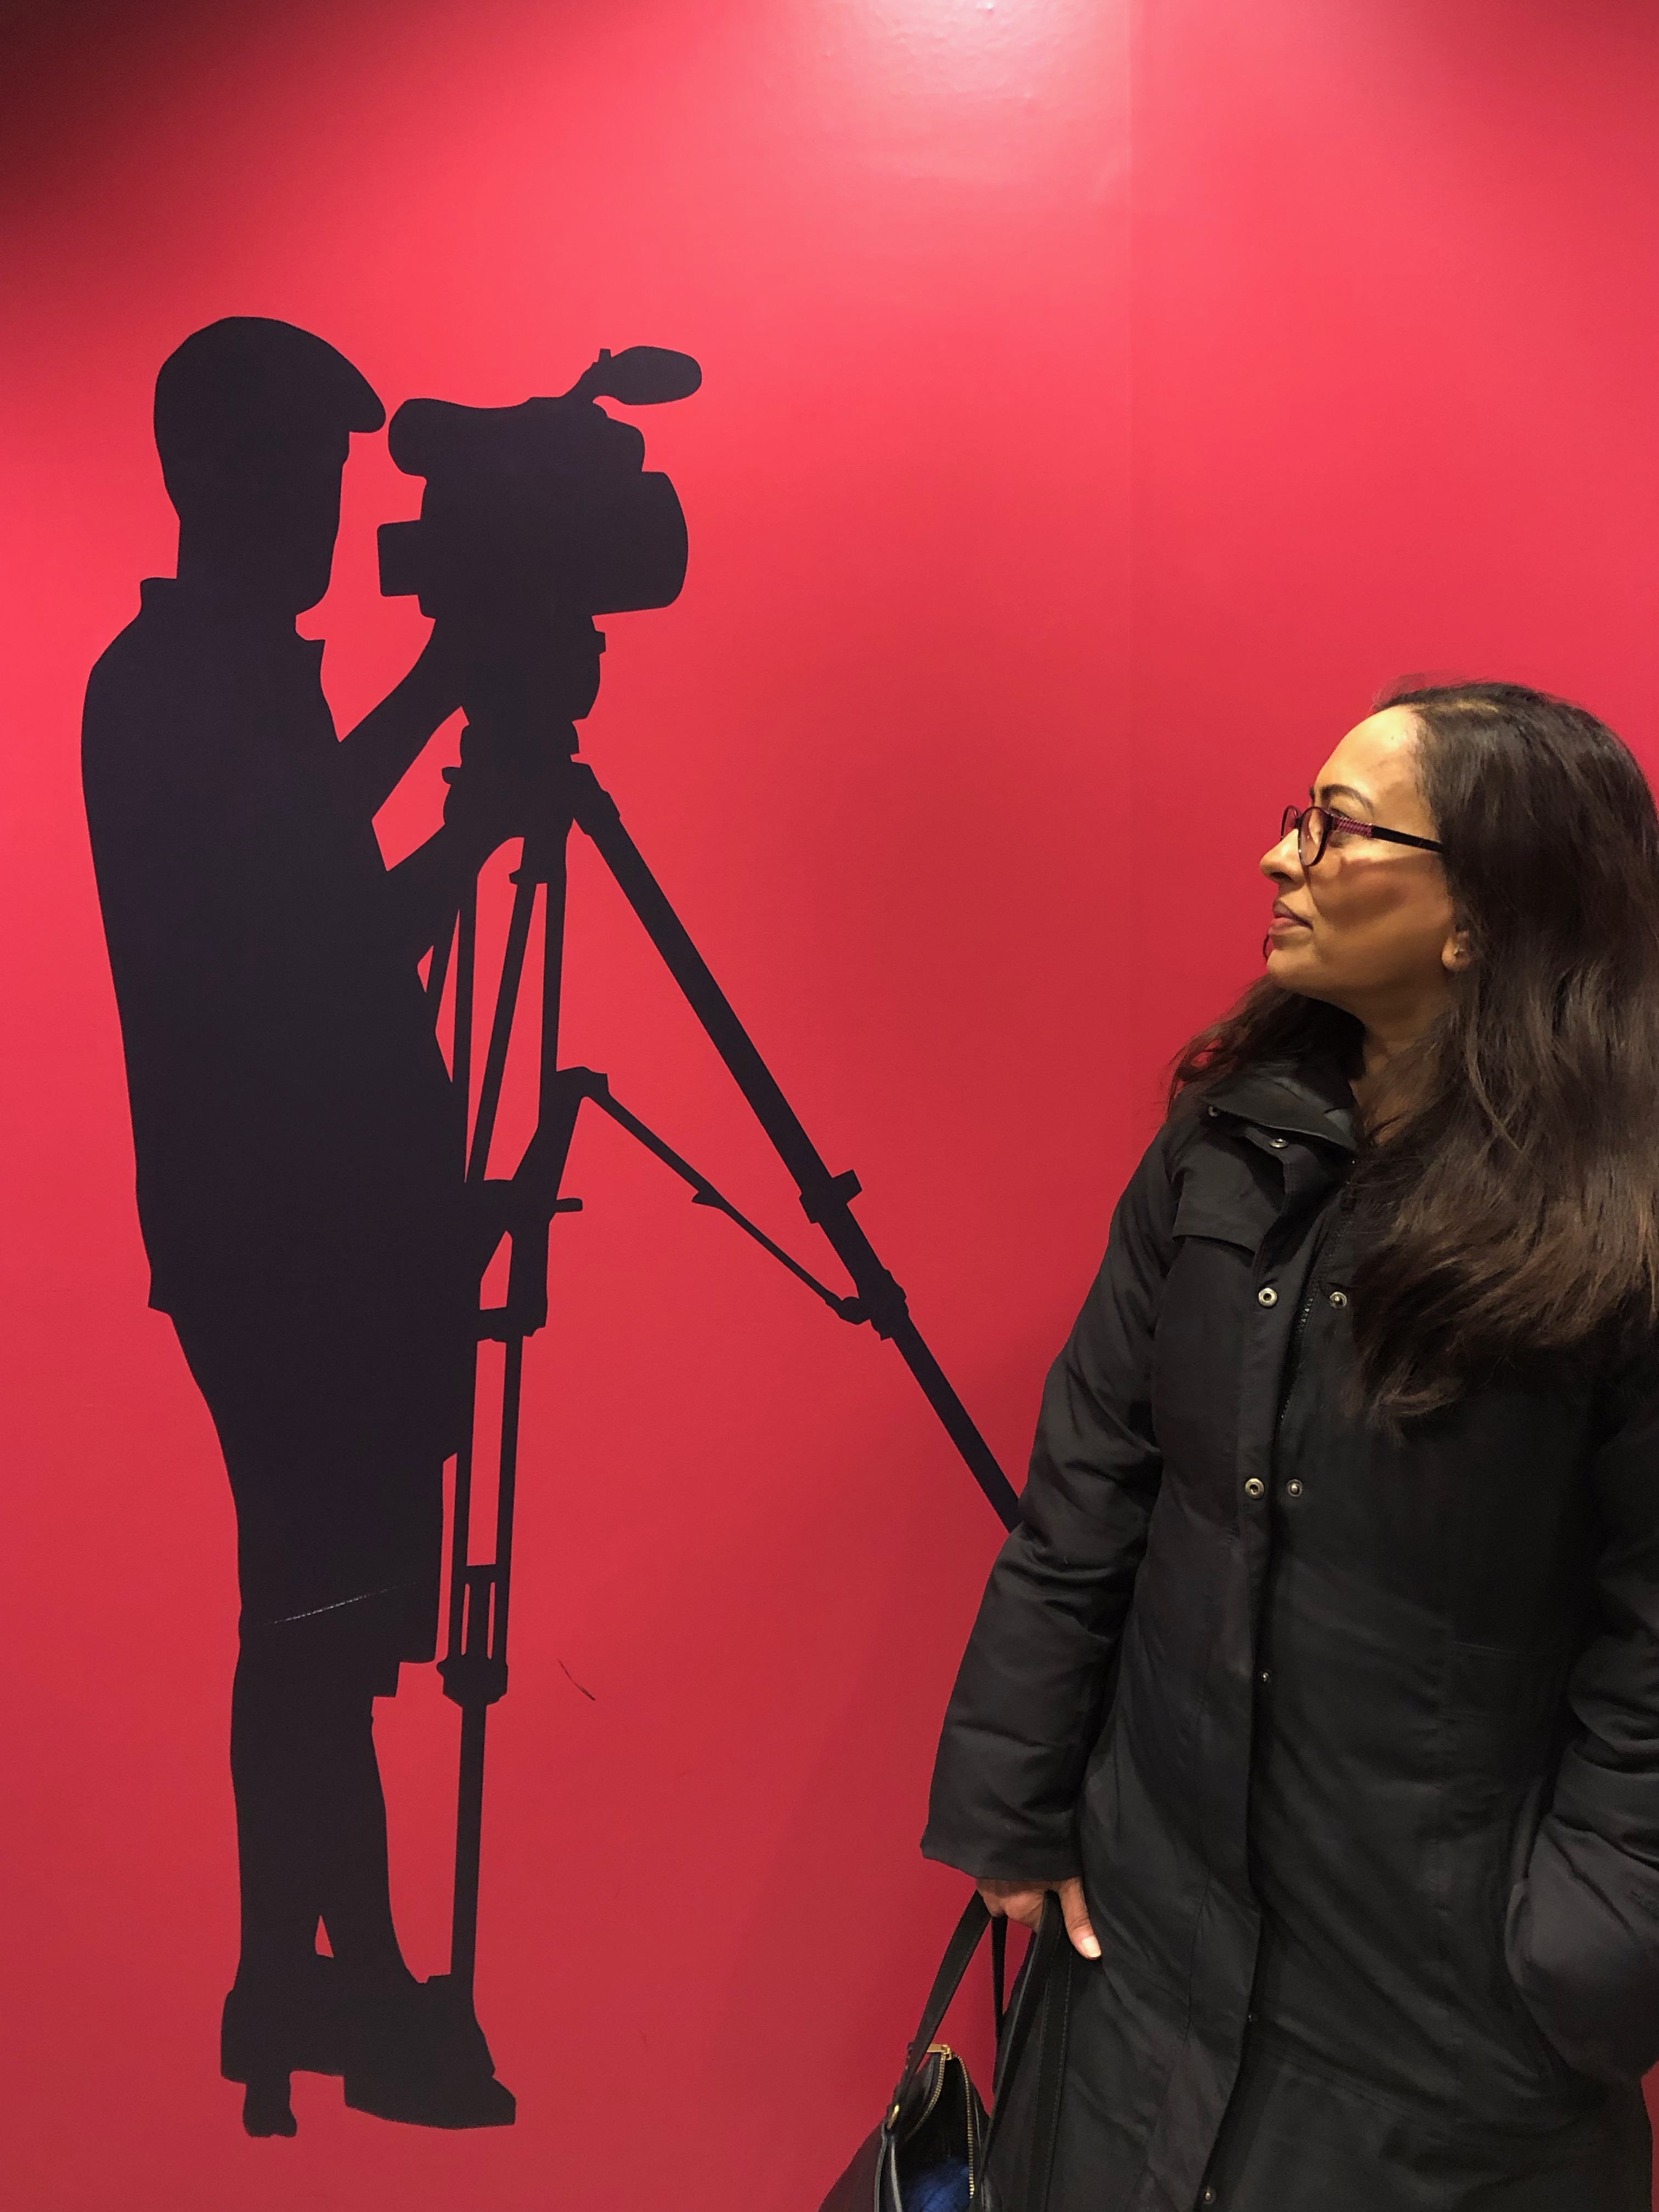 Woman looking at silhouette of man with camera on wall.